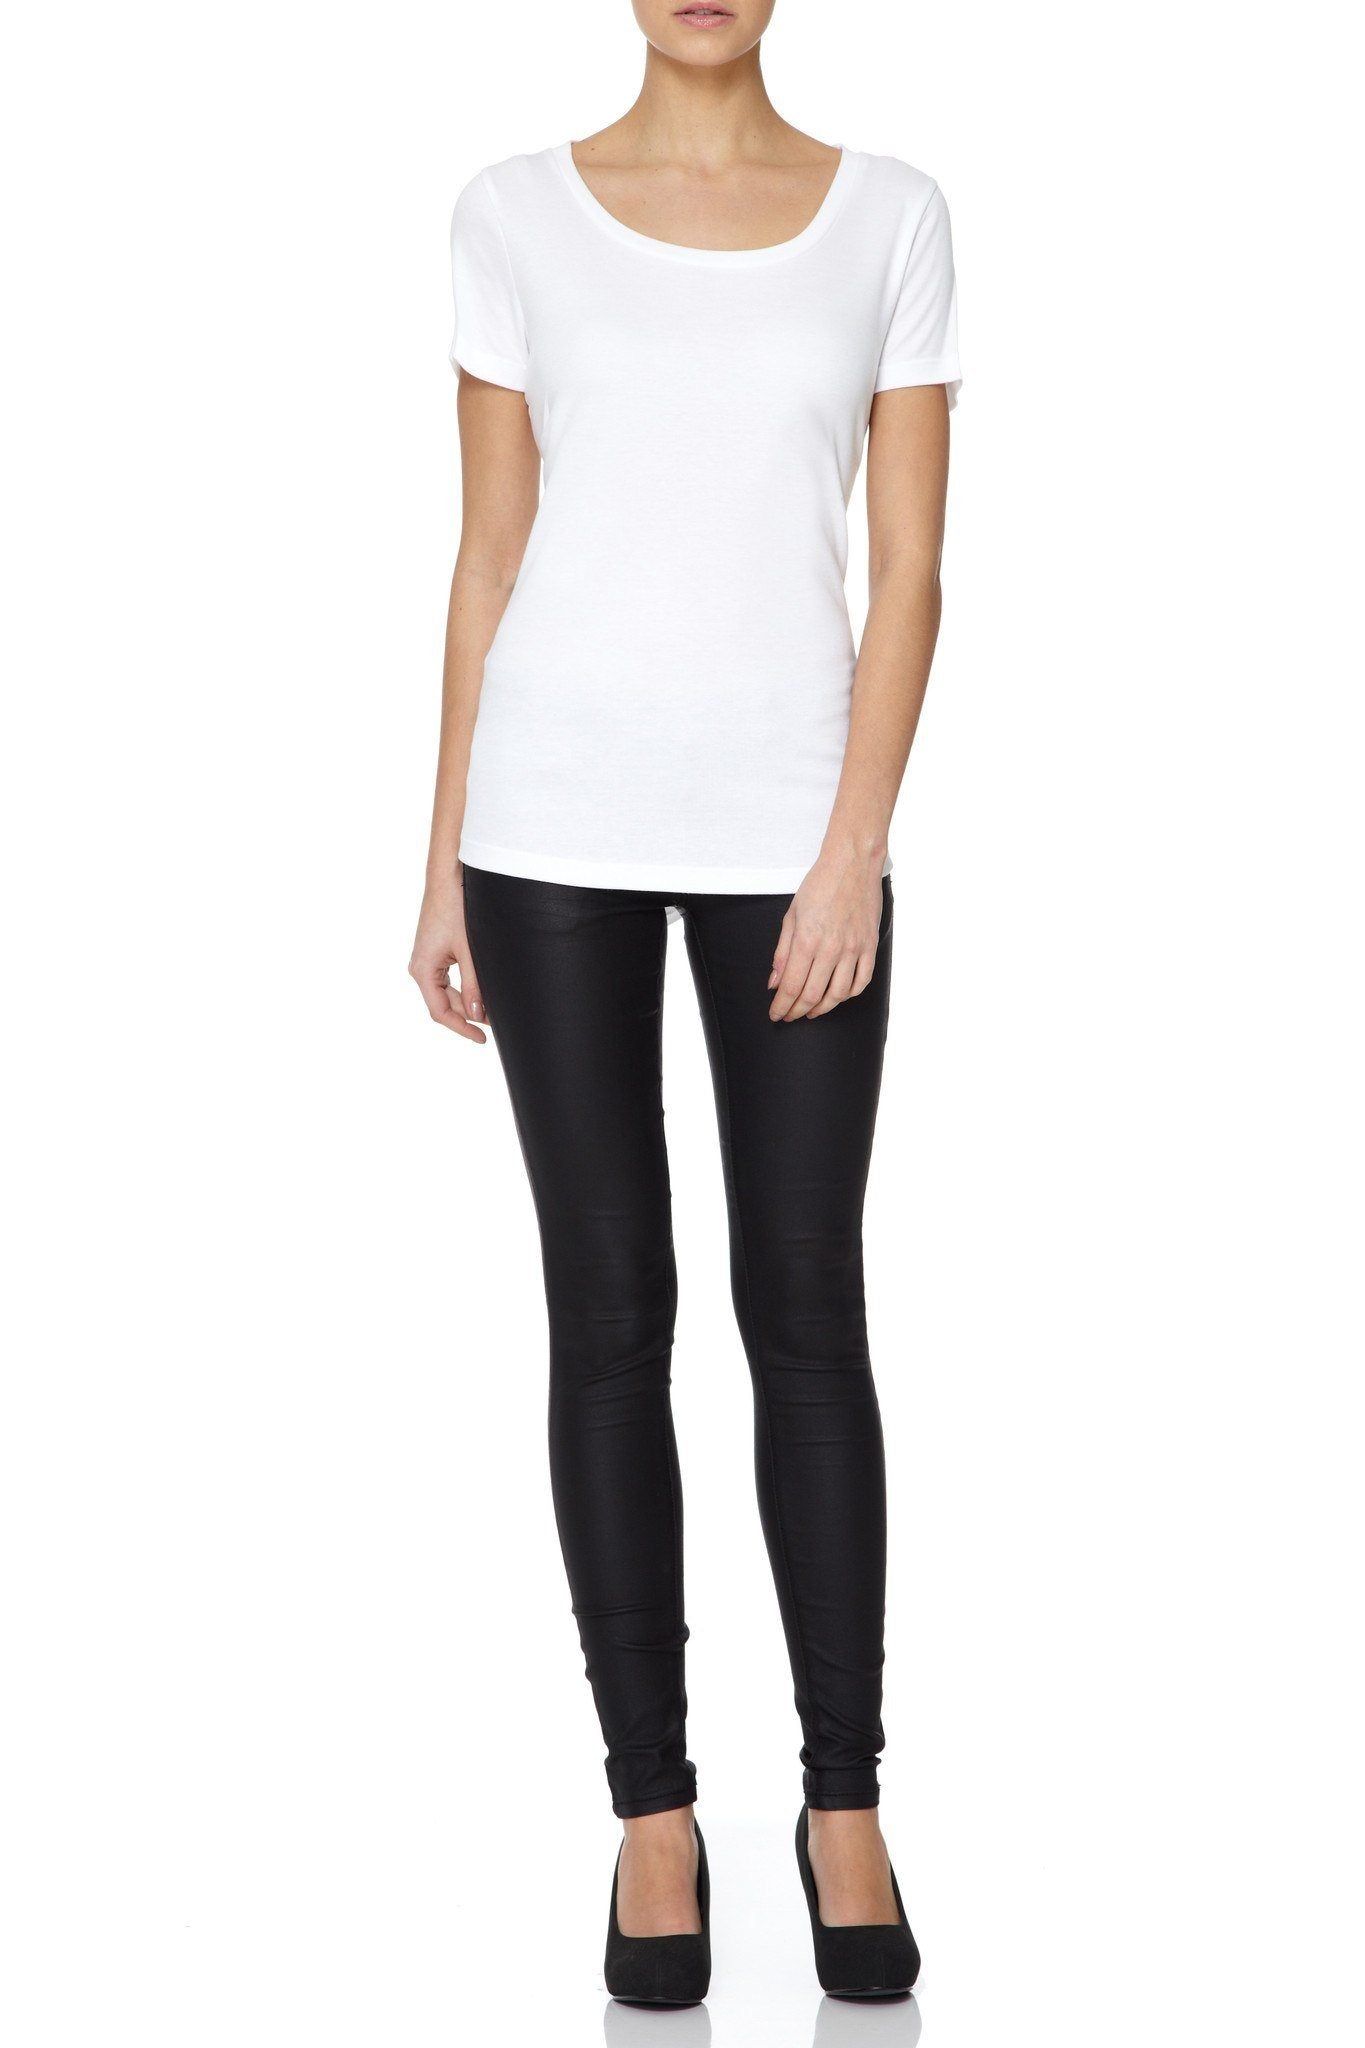 Scoop Neck Cotton Modal Blend T-shirt by Lavender Hill Clothing